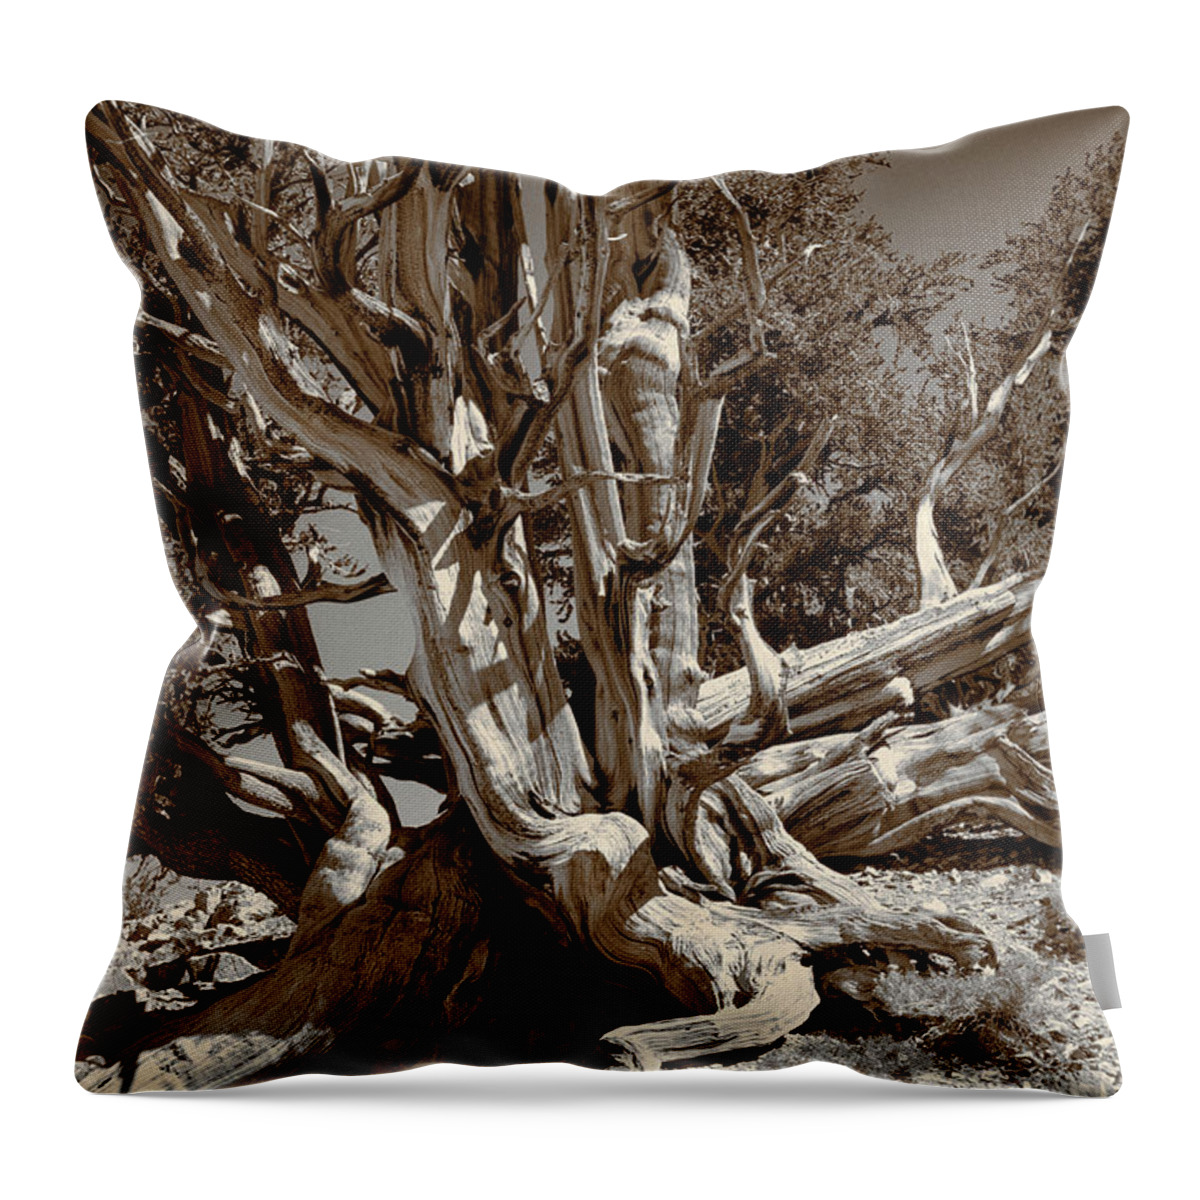 Bristlecone Pine Throw Pillow featuring the photograph Ancient Bristlecone Pine Tree, Composition 5 sepia tone, Inyo National Forest, California by Kathy Anselmo